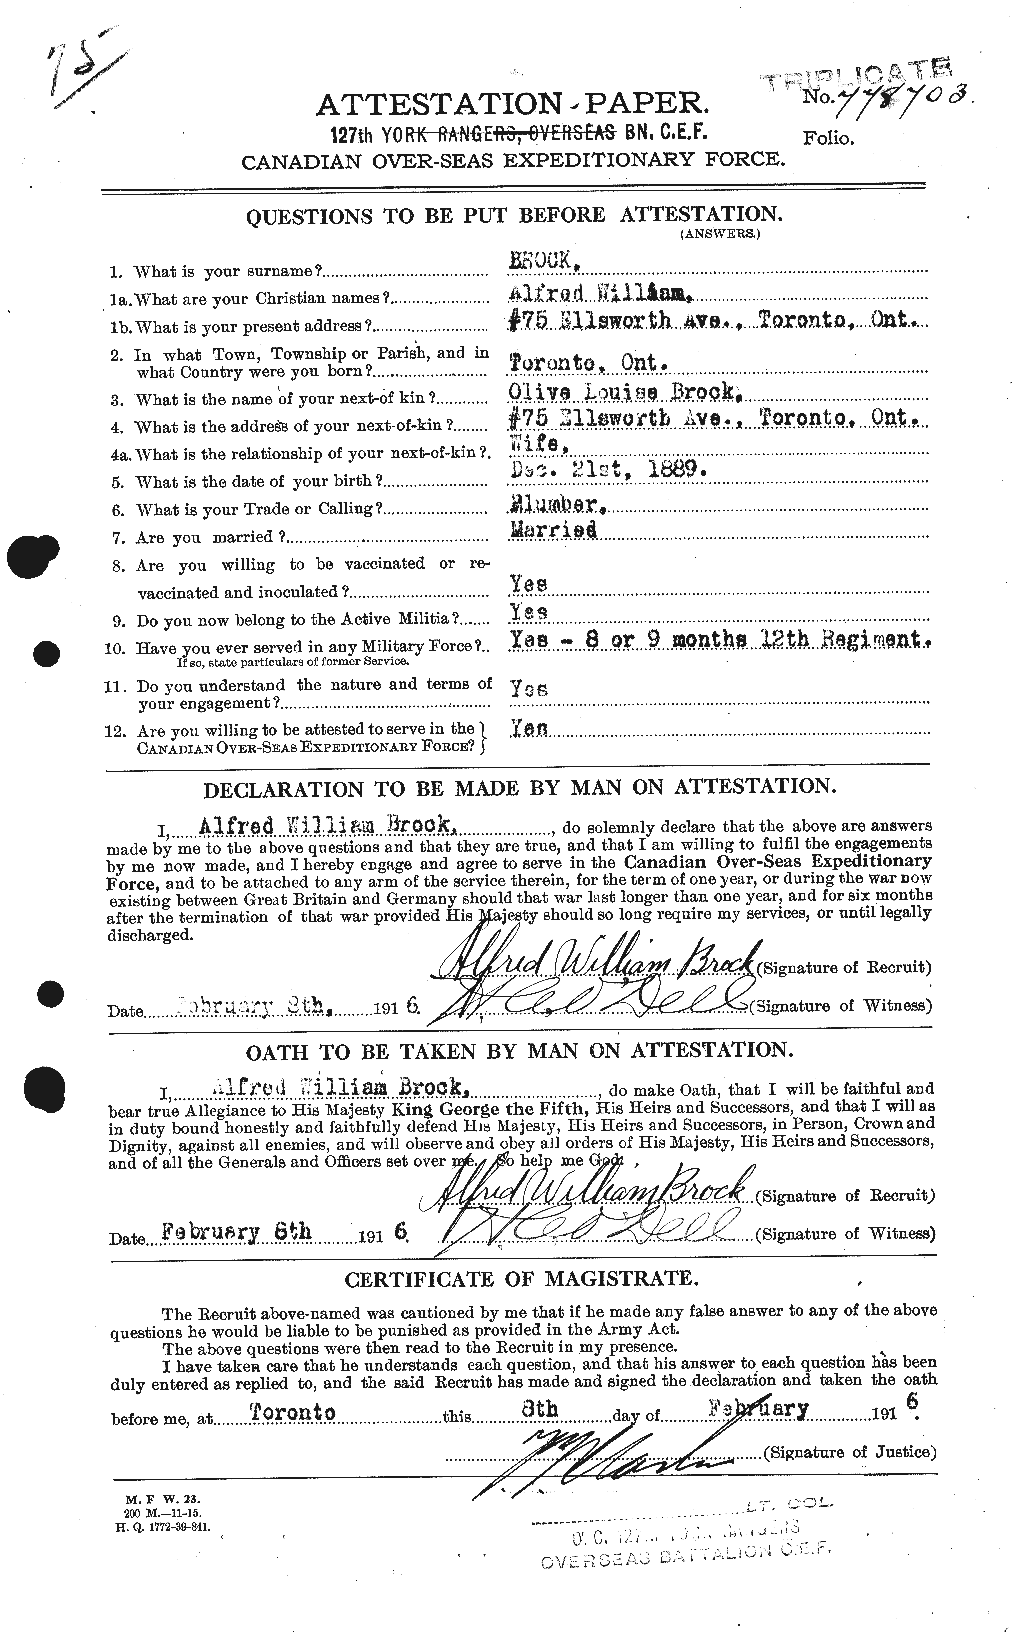 Personnel Records of the First World War - CEF 258170a